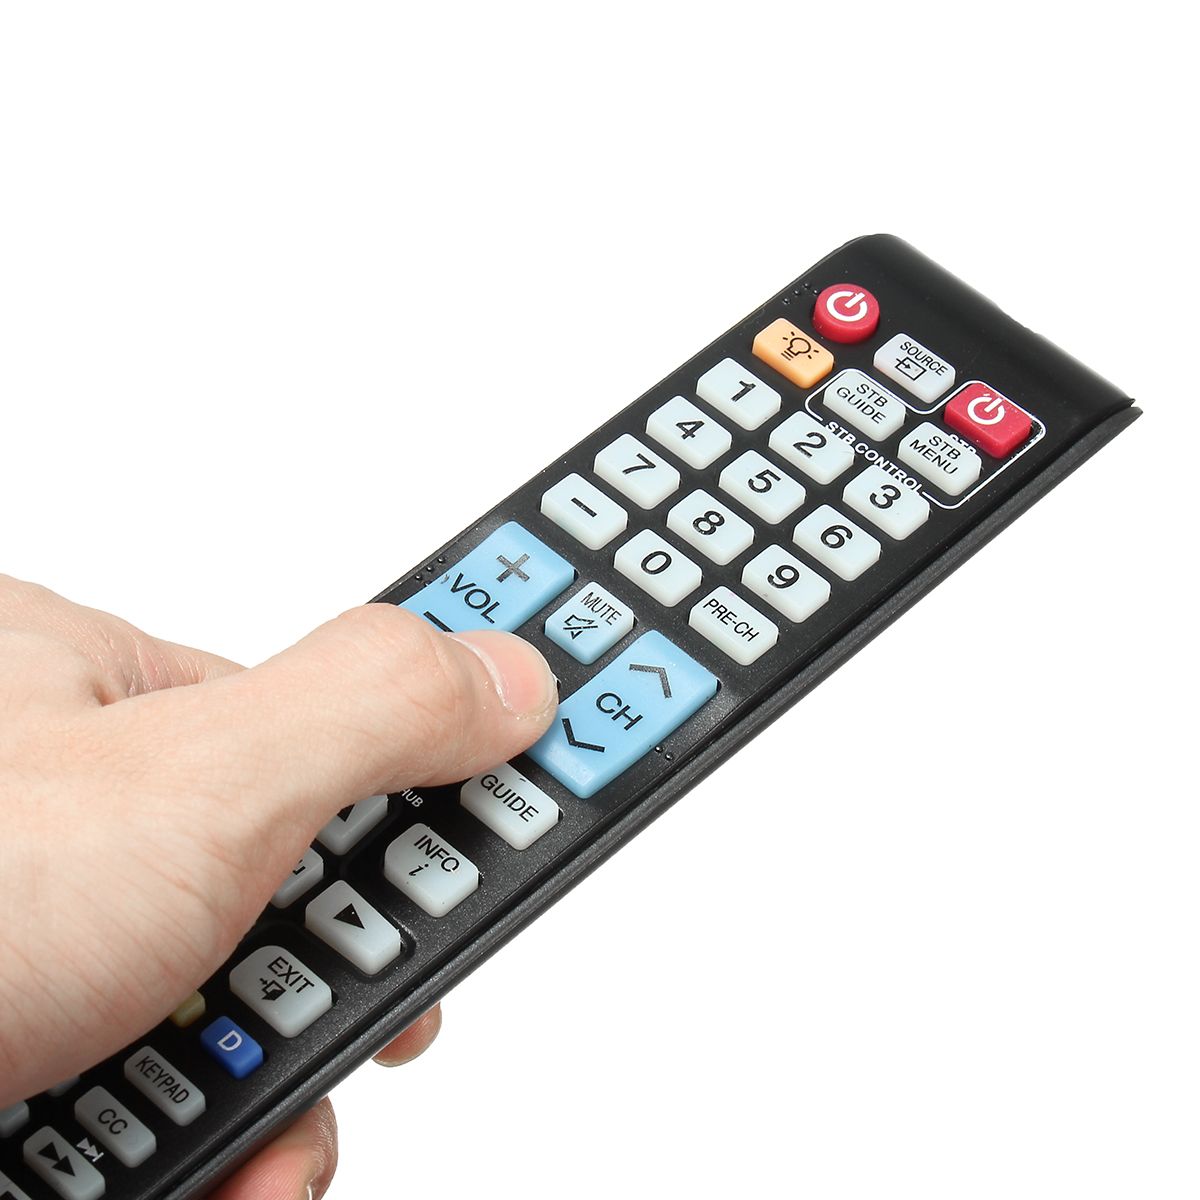 TV-Remote-Control-BN59-01179A-for-SAMSUNG-LCD-LED-Smart-TV-1123890